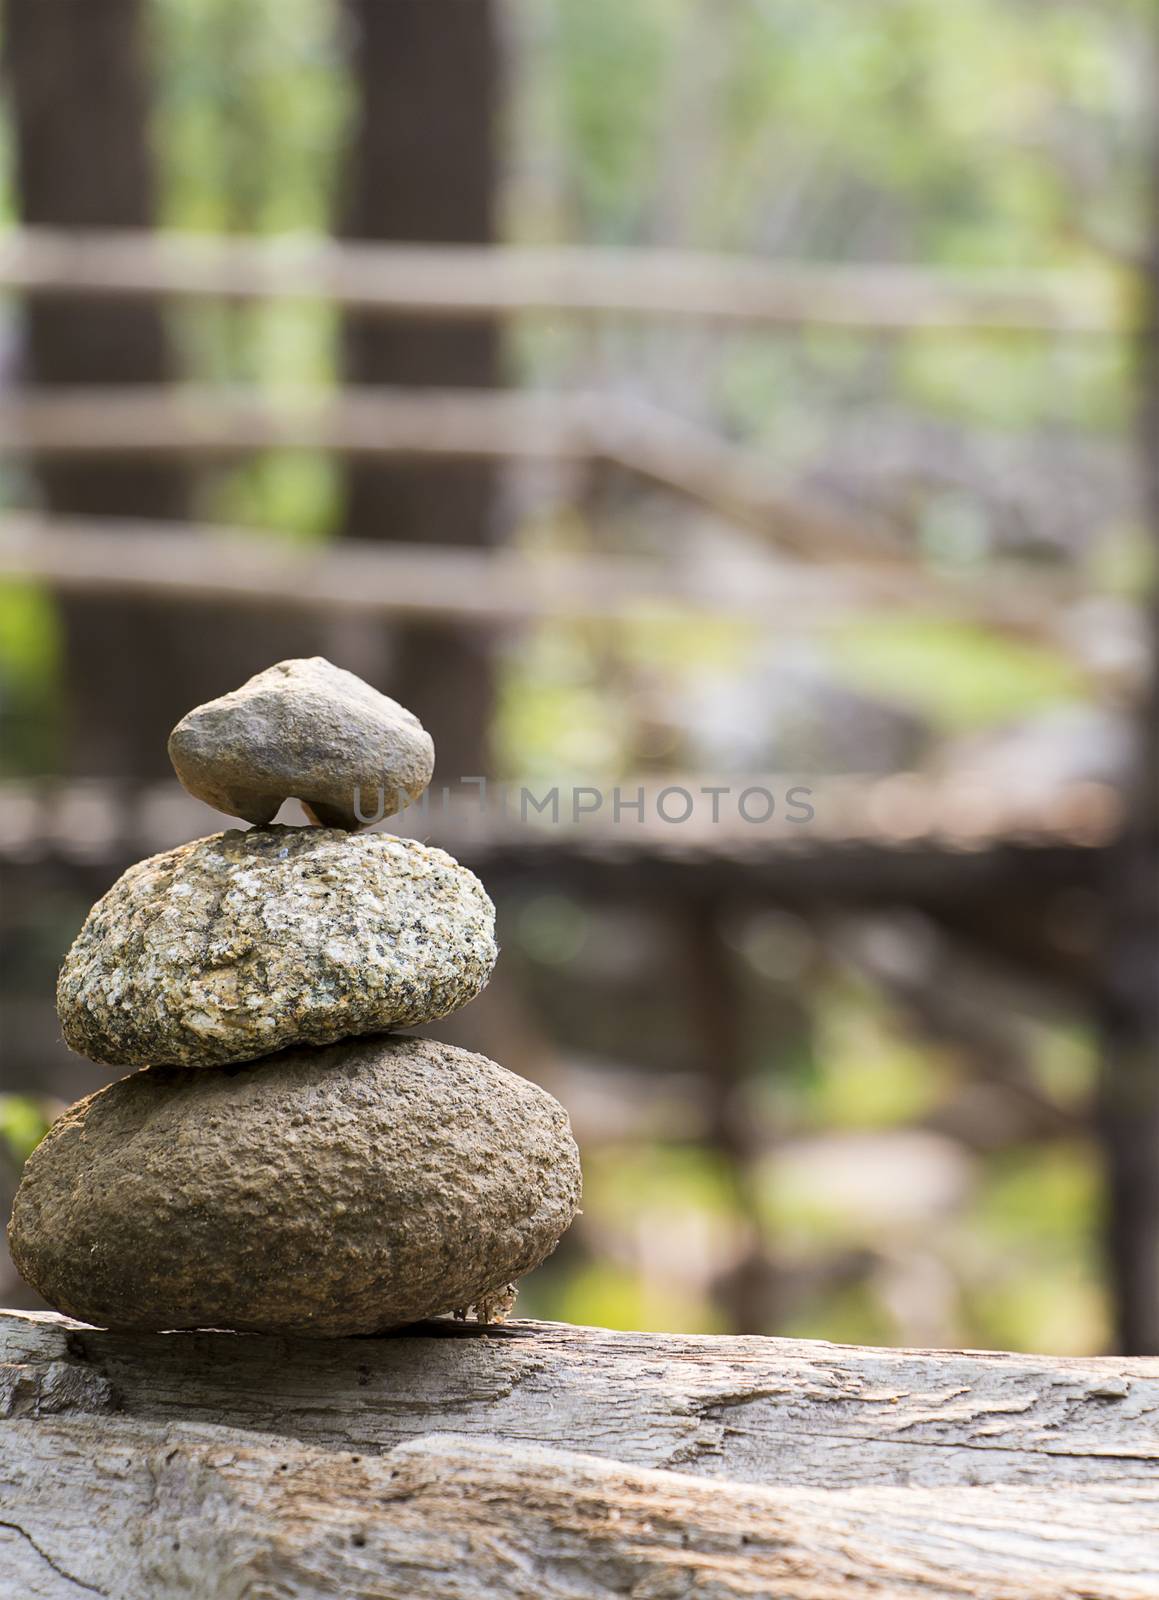 Zen stone with bamboo bridge on background by chingraph